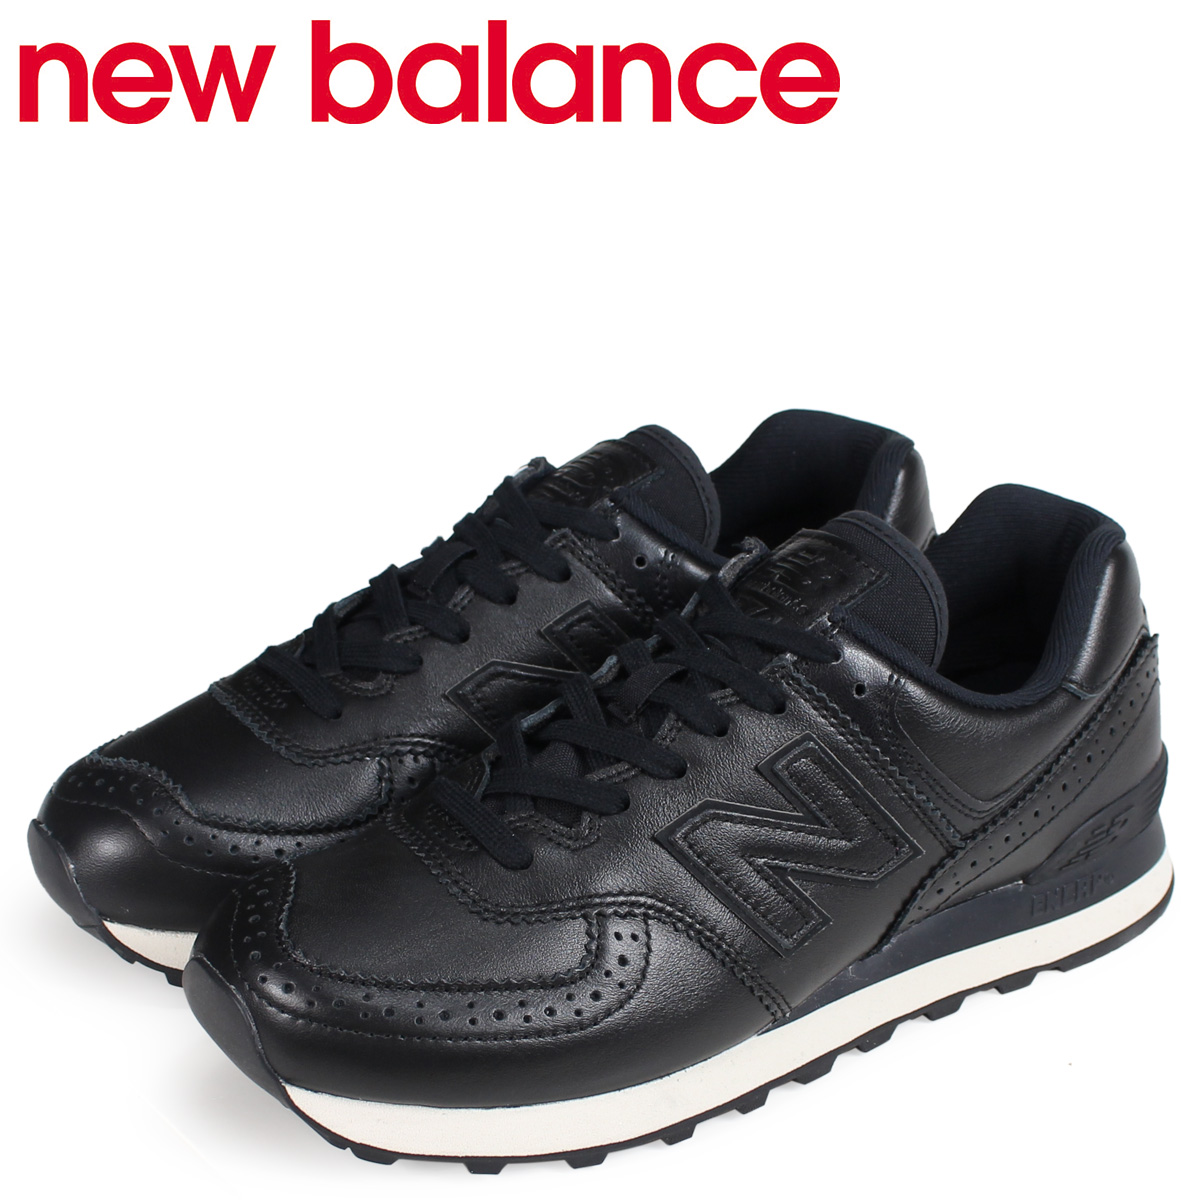 new balance sneakers 574